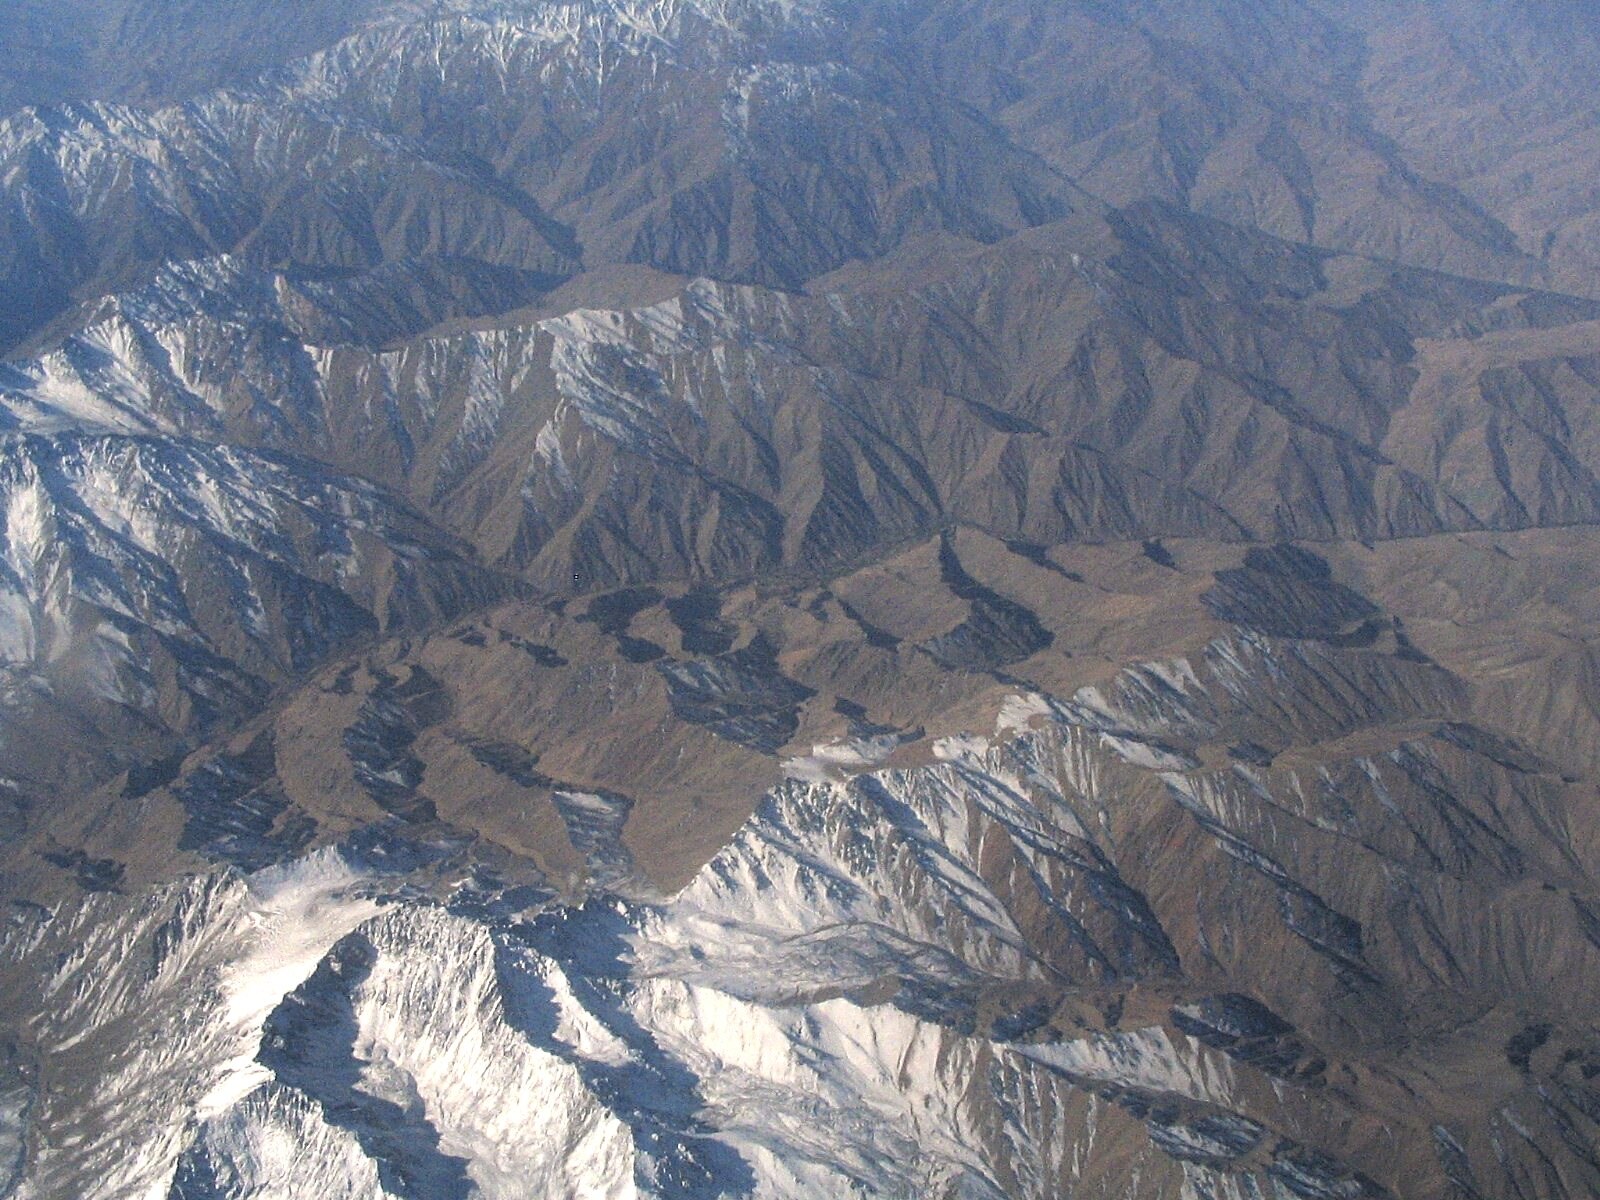 The mountains of Afghanistan from Sydney, New South Wales, Australia - 10th October 2004